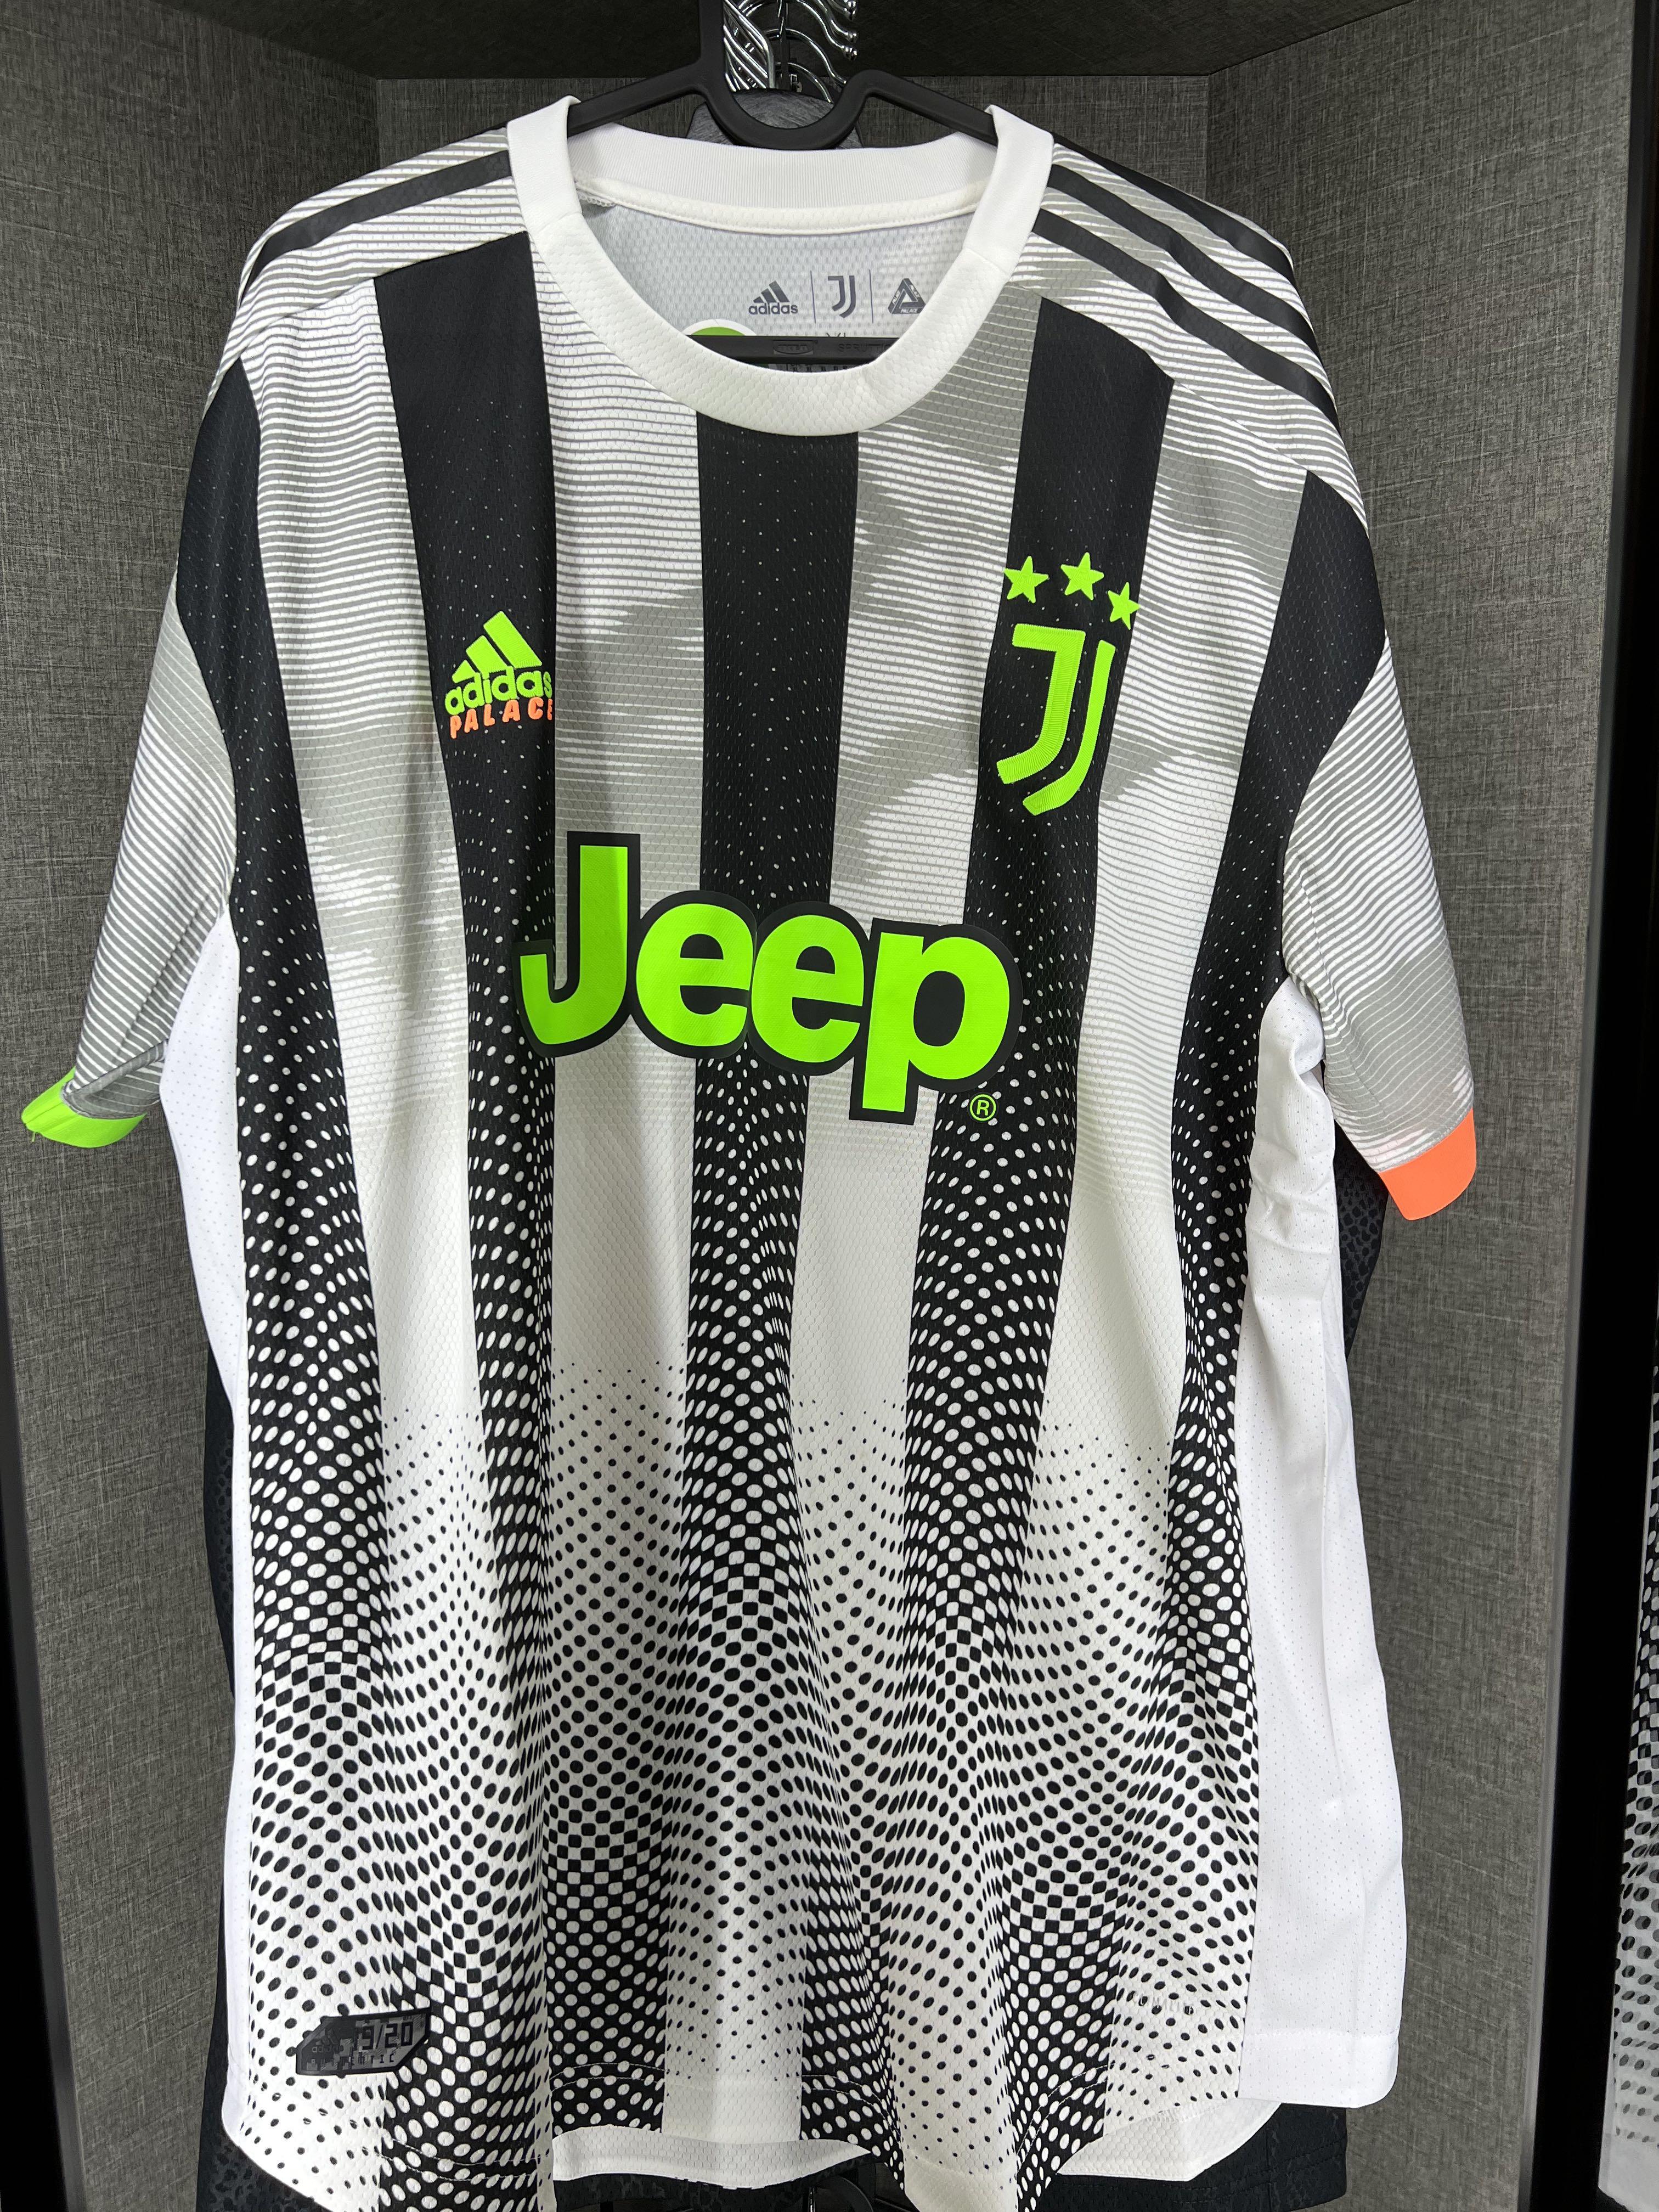 Adidas Palace Juventus Jersey Authentic Player Version 4th Kit, Men's Fashion, & Sets, Tshirts & on Carousell